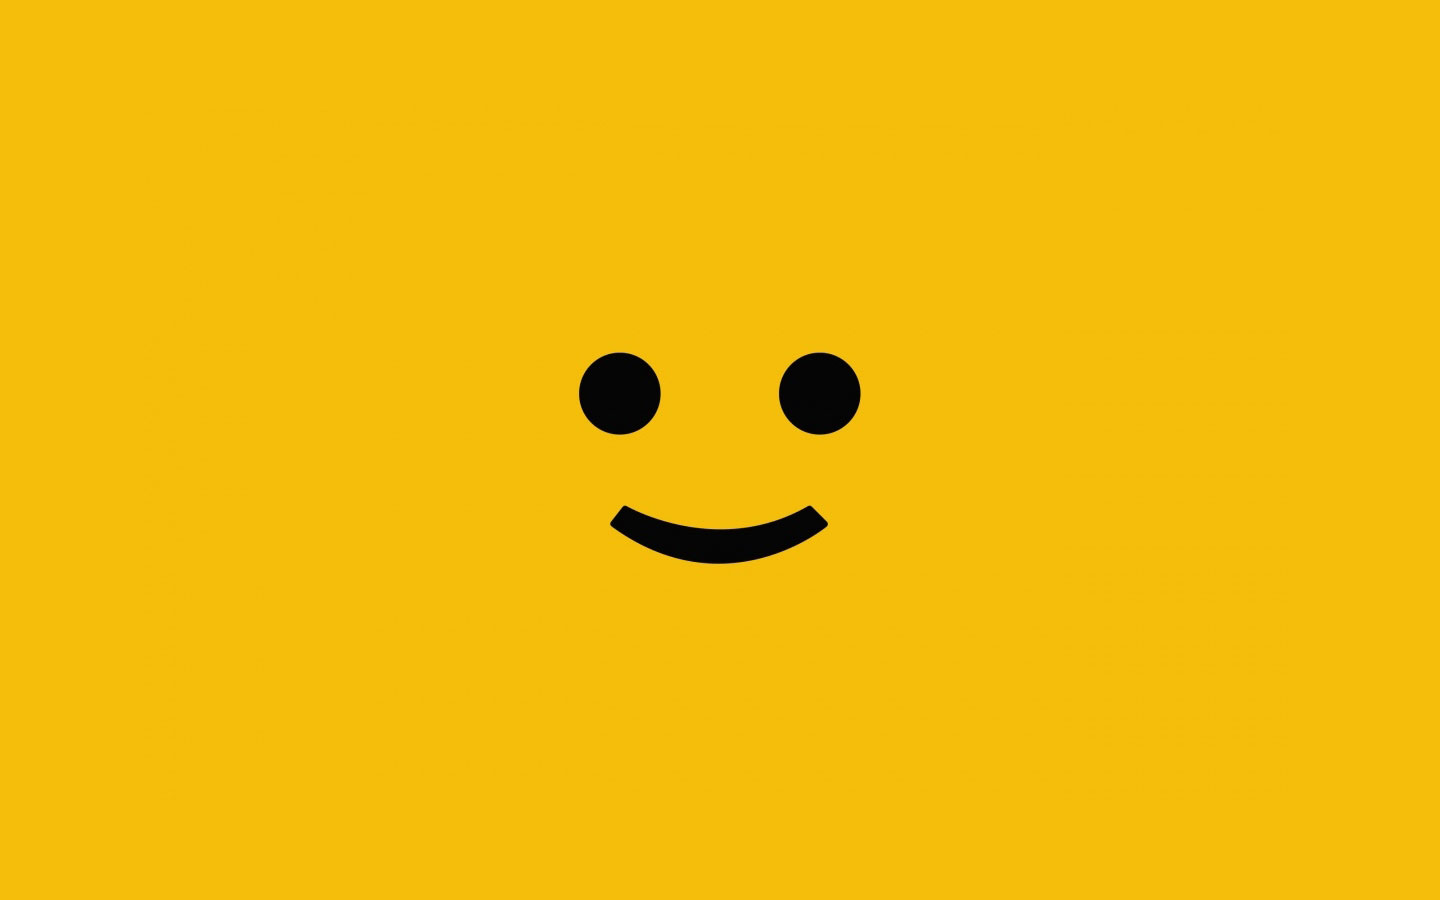 Widescreen Smiley Face Wallpaper Pictures To